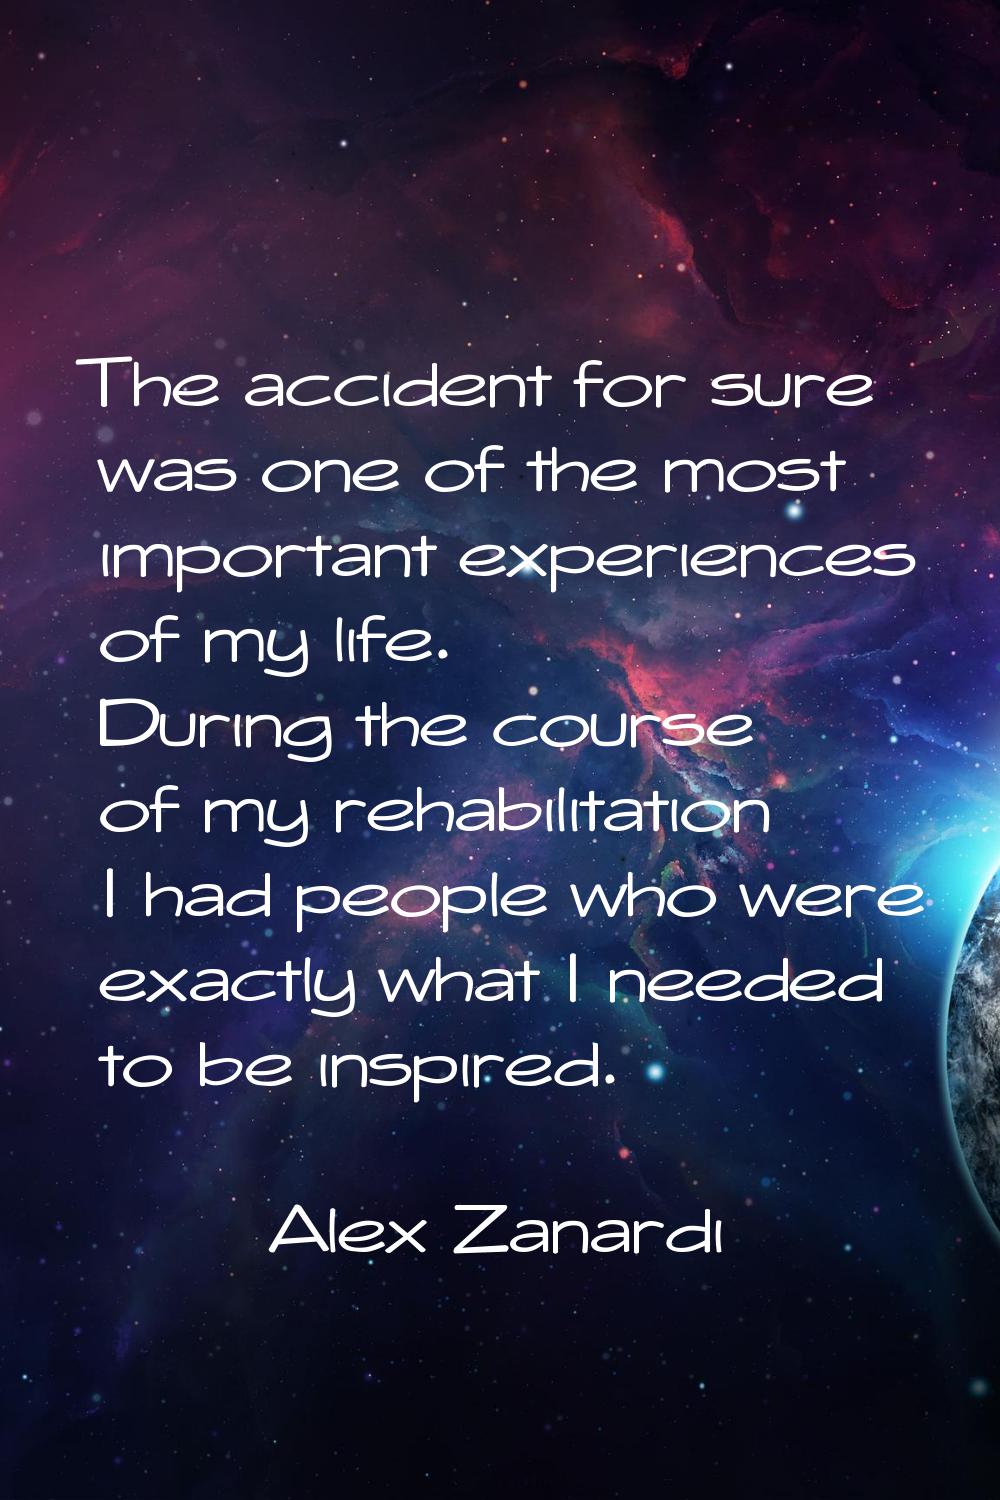 The accident for sure was one of the most important experiences of my life. During the course of my